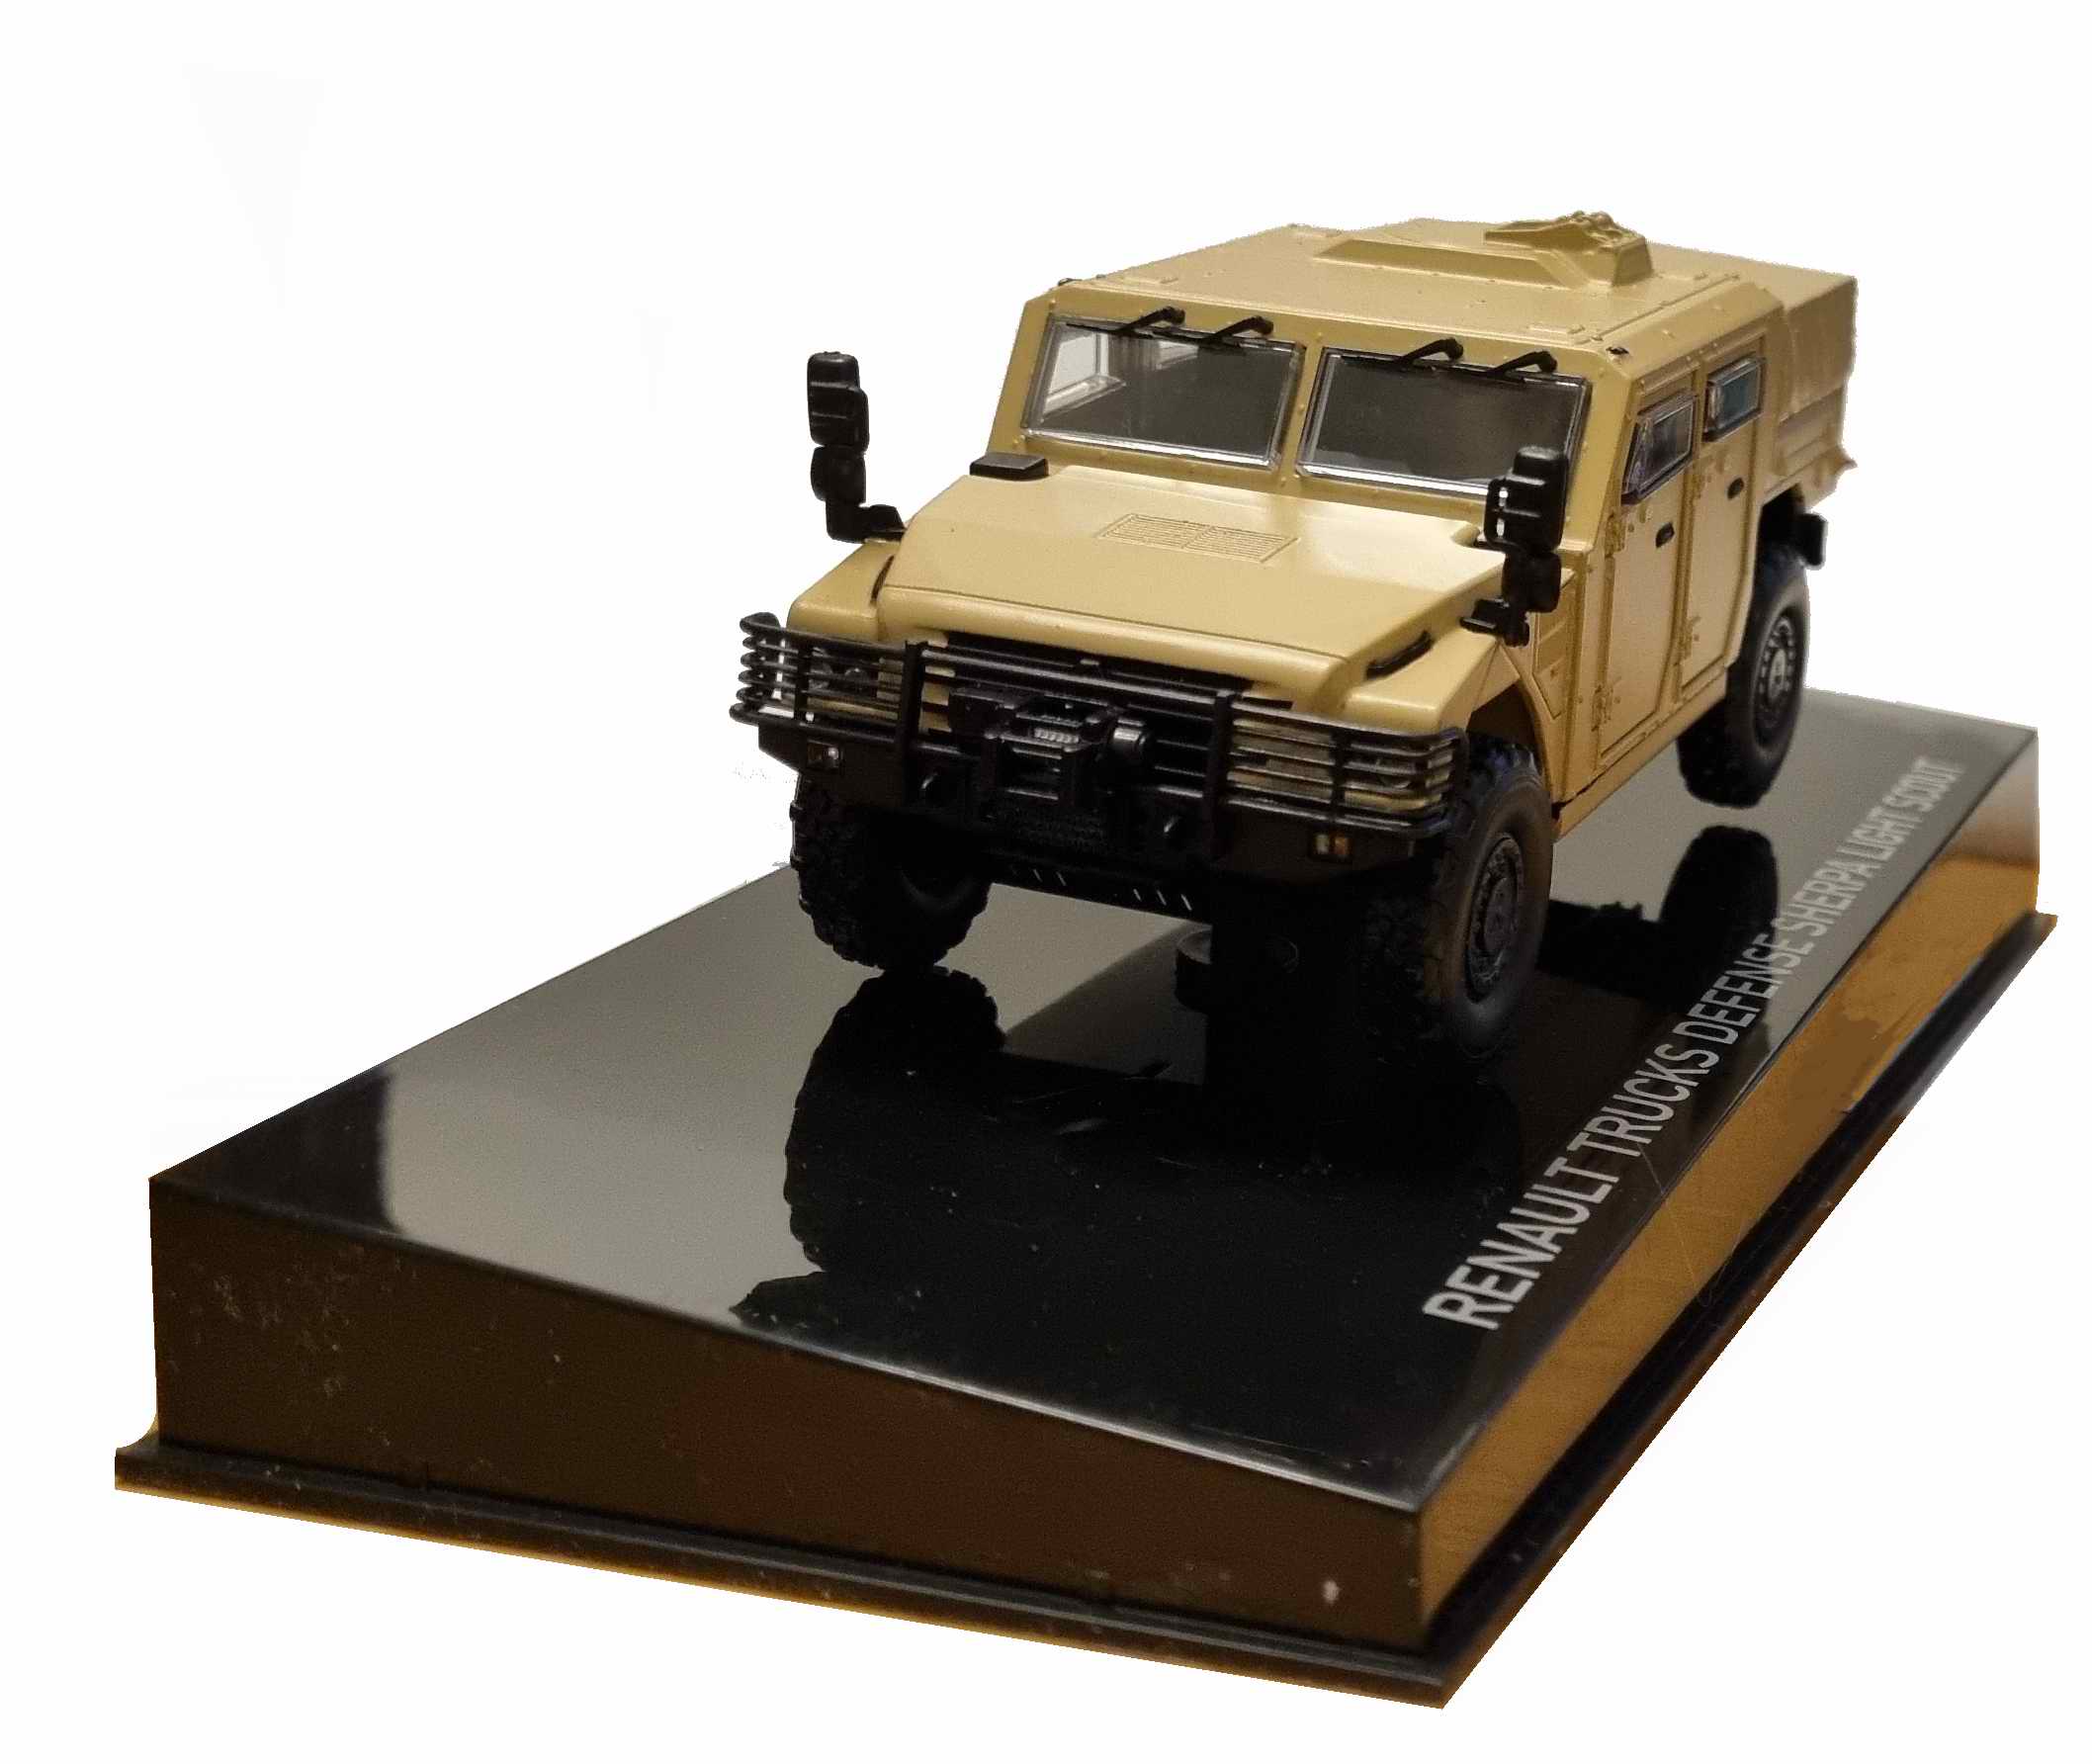 Miniature Voiture militaire RENAULT SHERPA LIGHT SCOUT 1/43 Norev